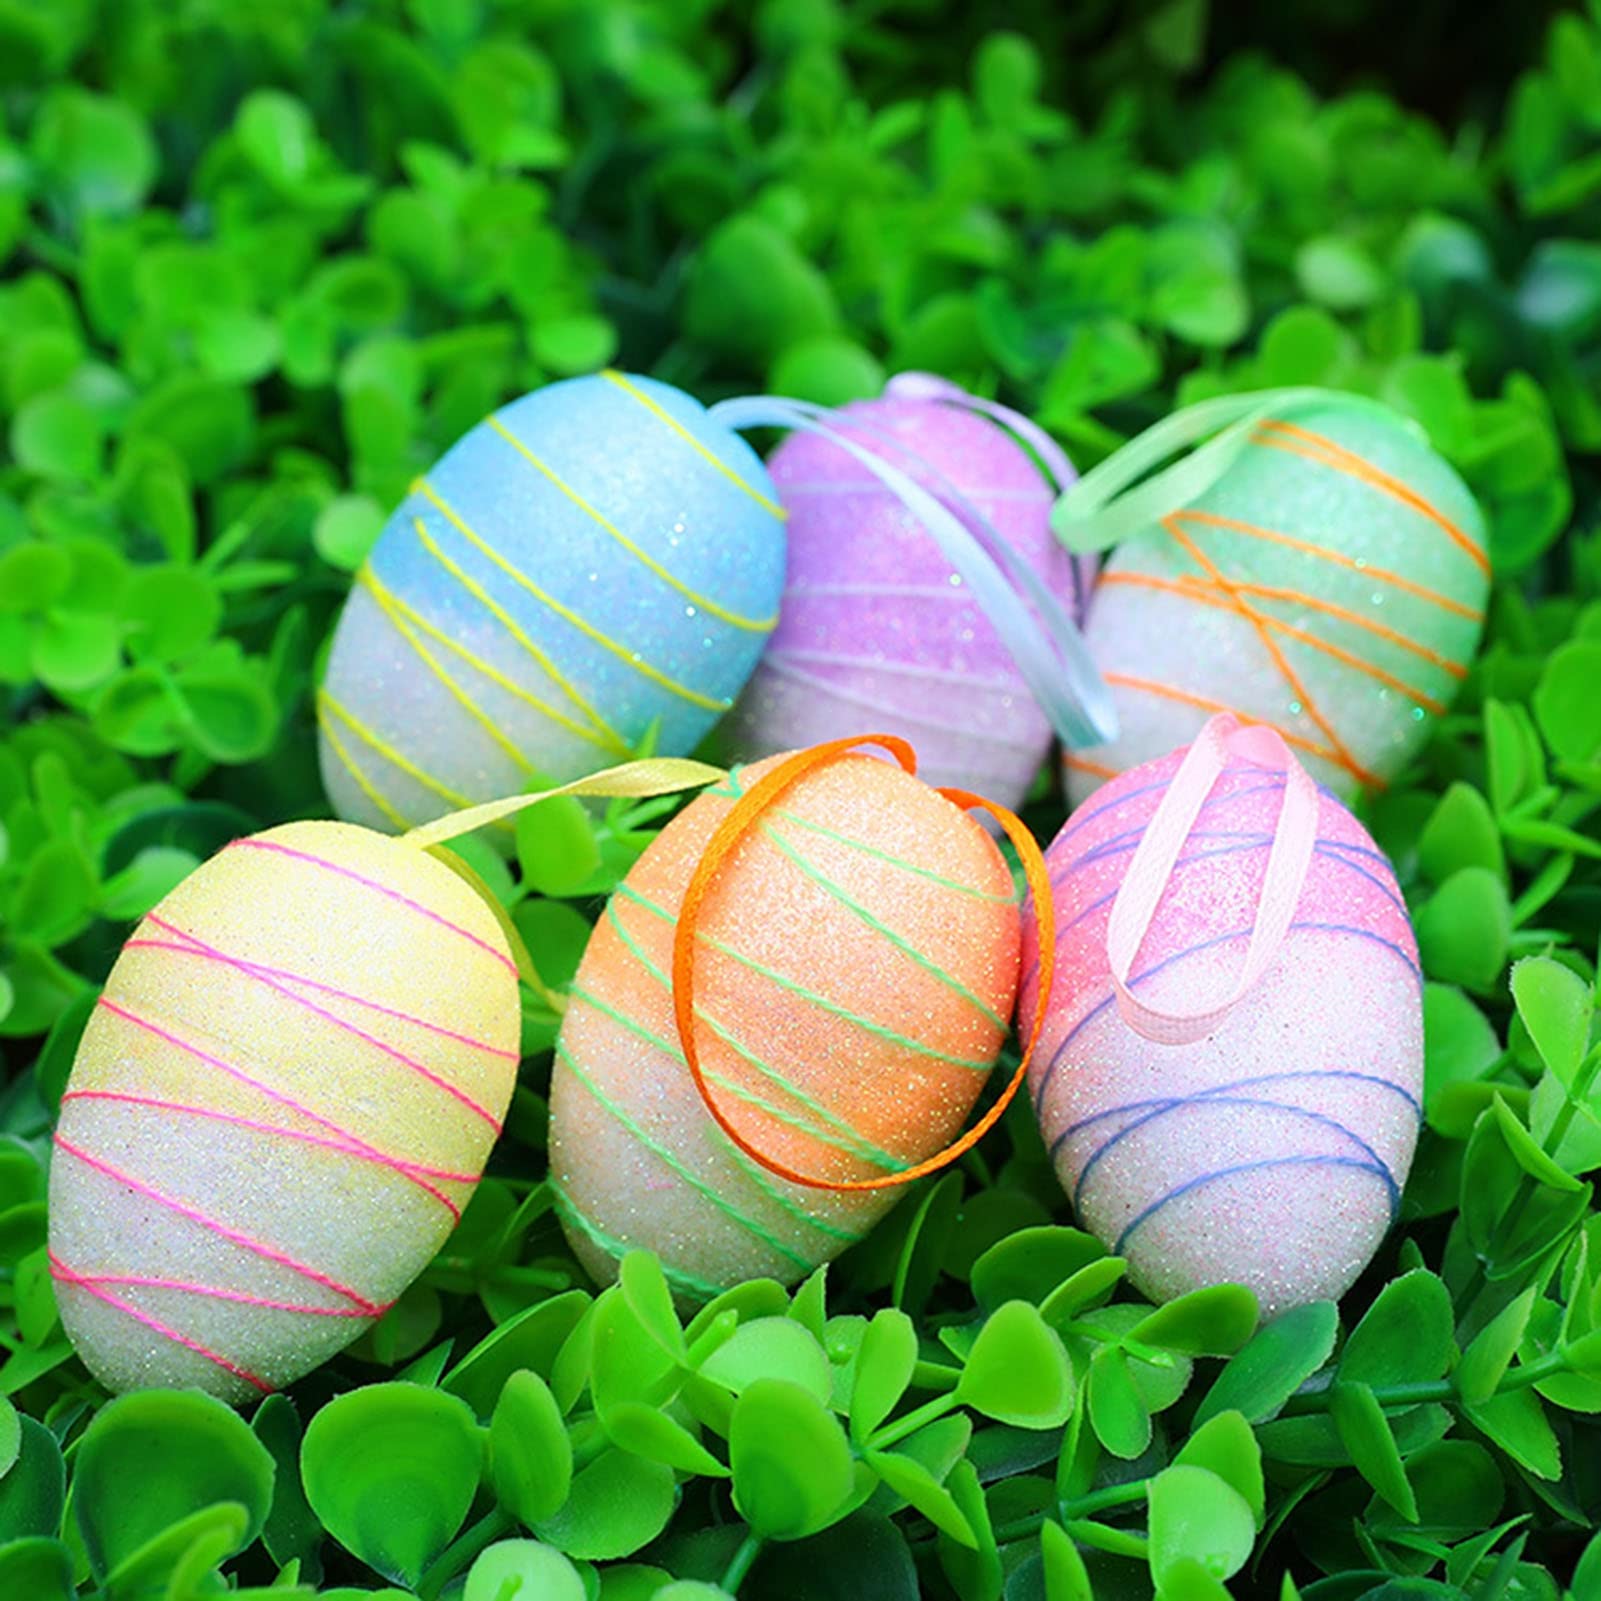 🔥HOT SALE 49% OFF - Easter Egg with Ropes